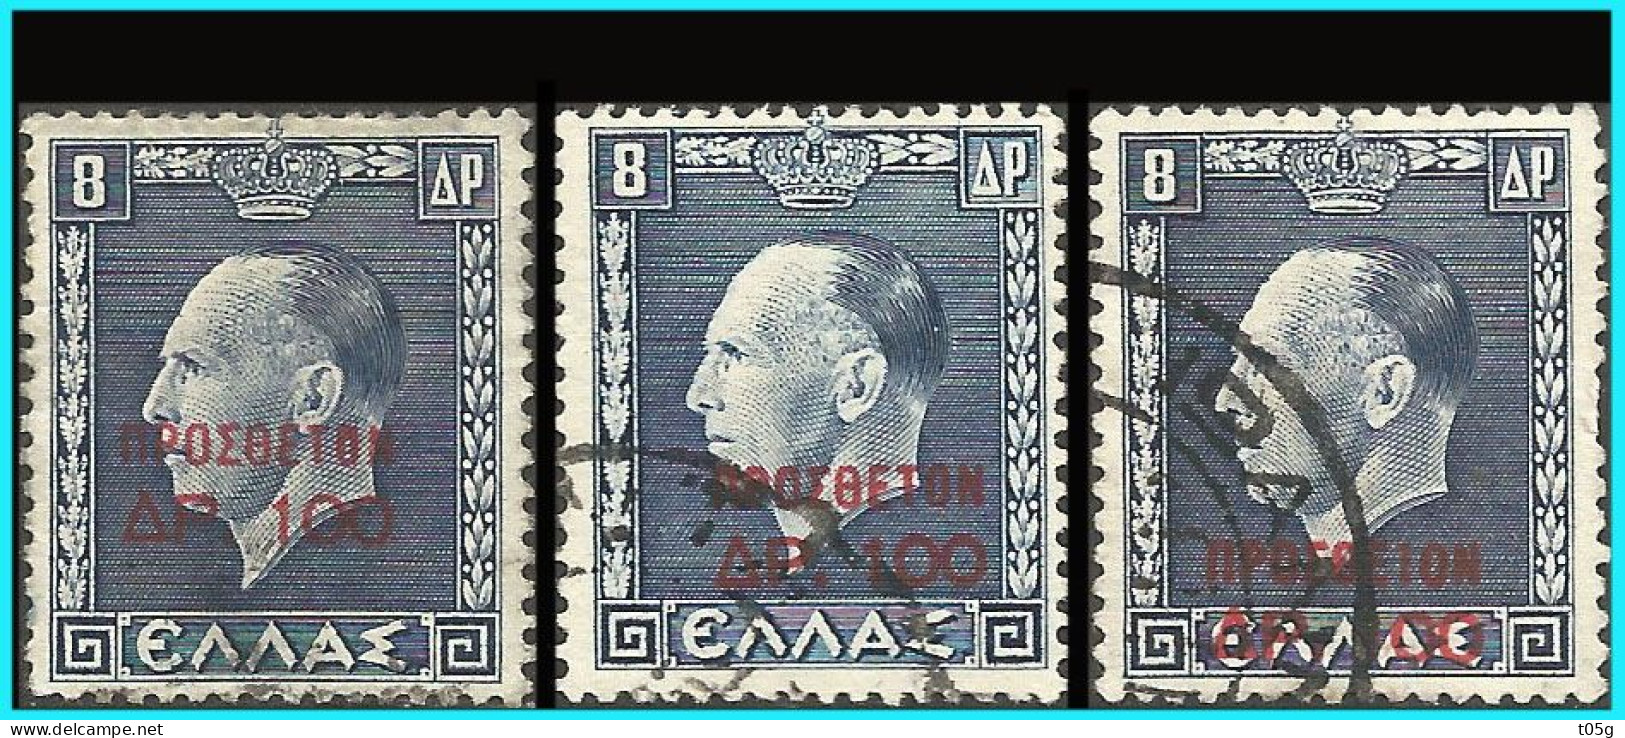 GREECE-GRECE-1951: overprints Reading From Up To Down- Charity Stamps Used - Charity Issues